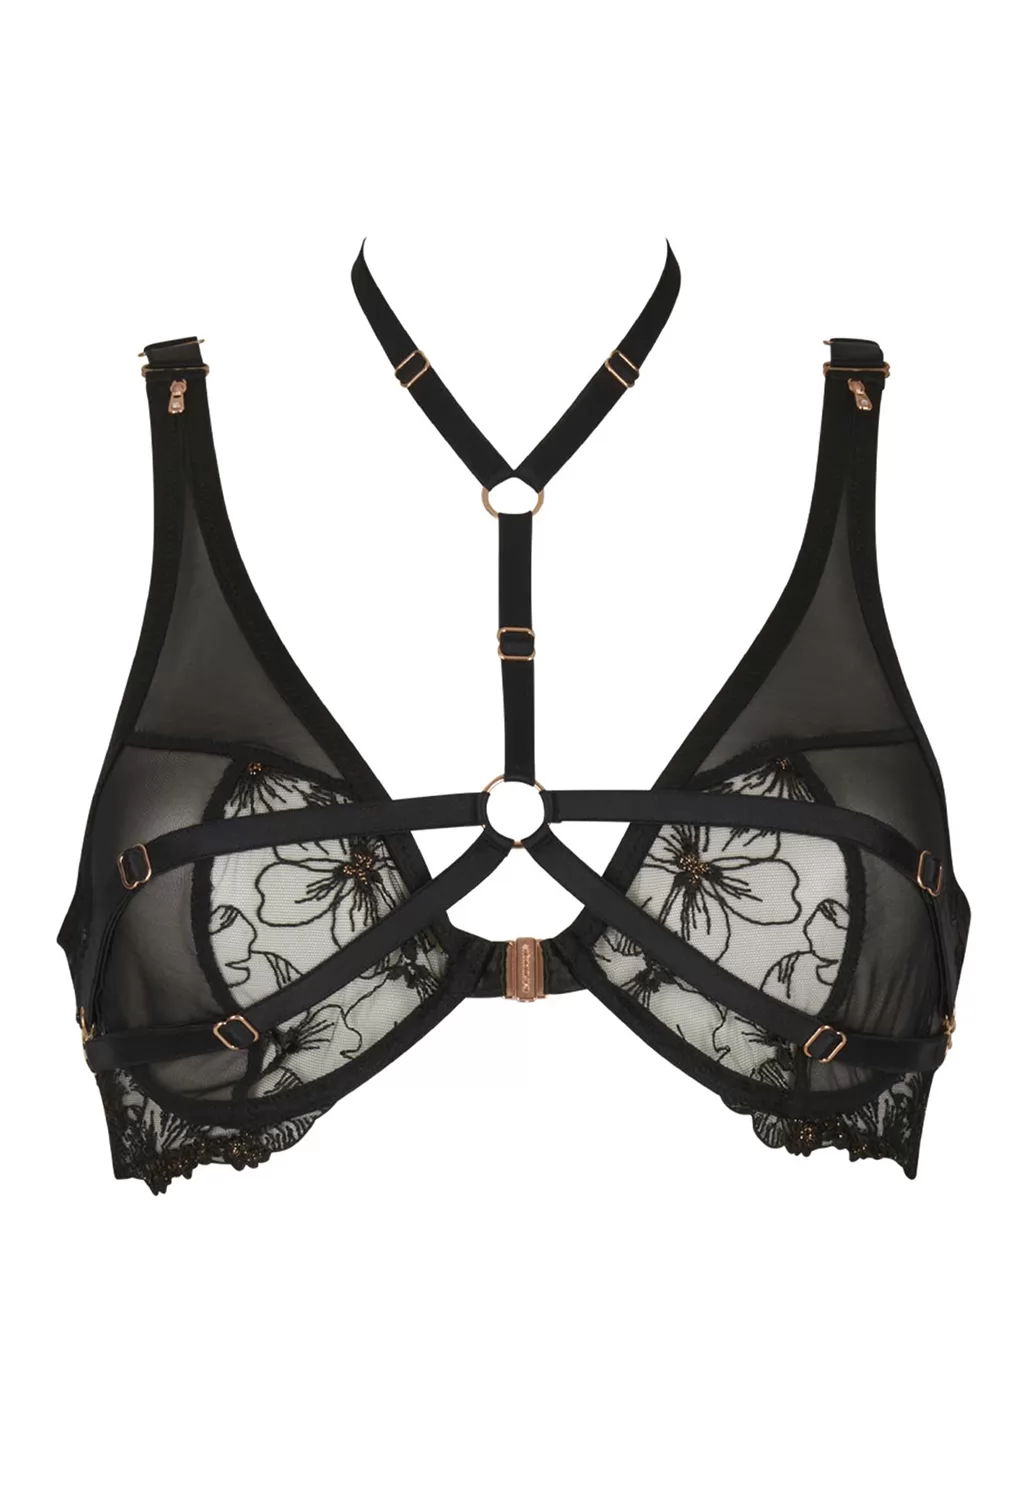 Ivy bra and removable harness